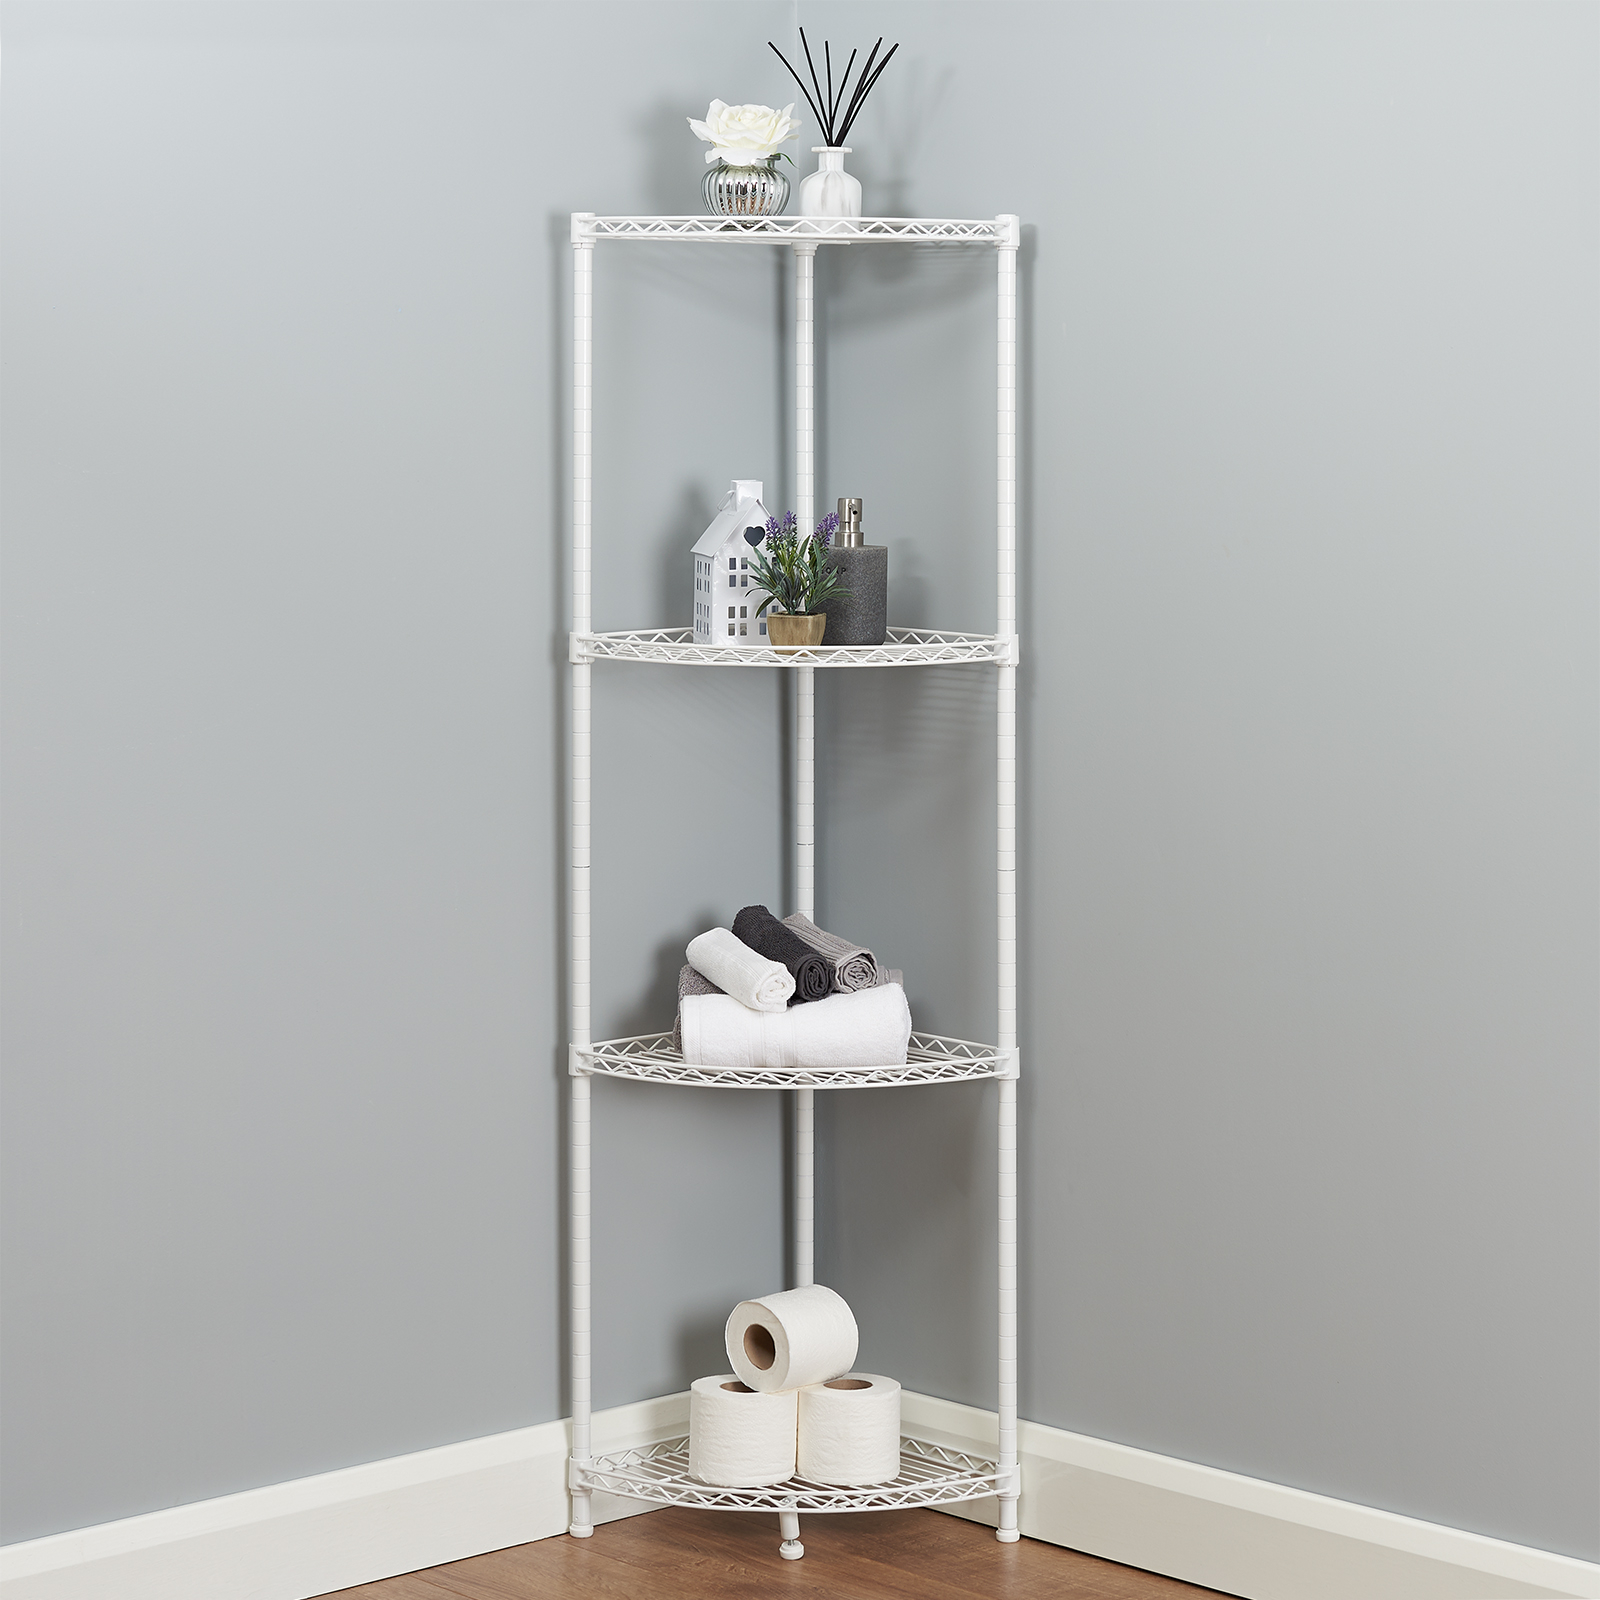 Details About 4 Tier Corner Bathroom Storage Shelves Metal White Shelving Unit Display Rack pertaining to dimensions 1600 X 1600